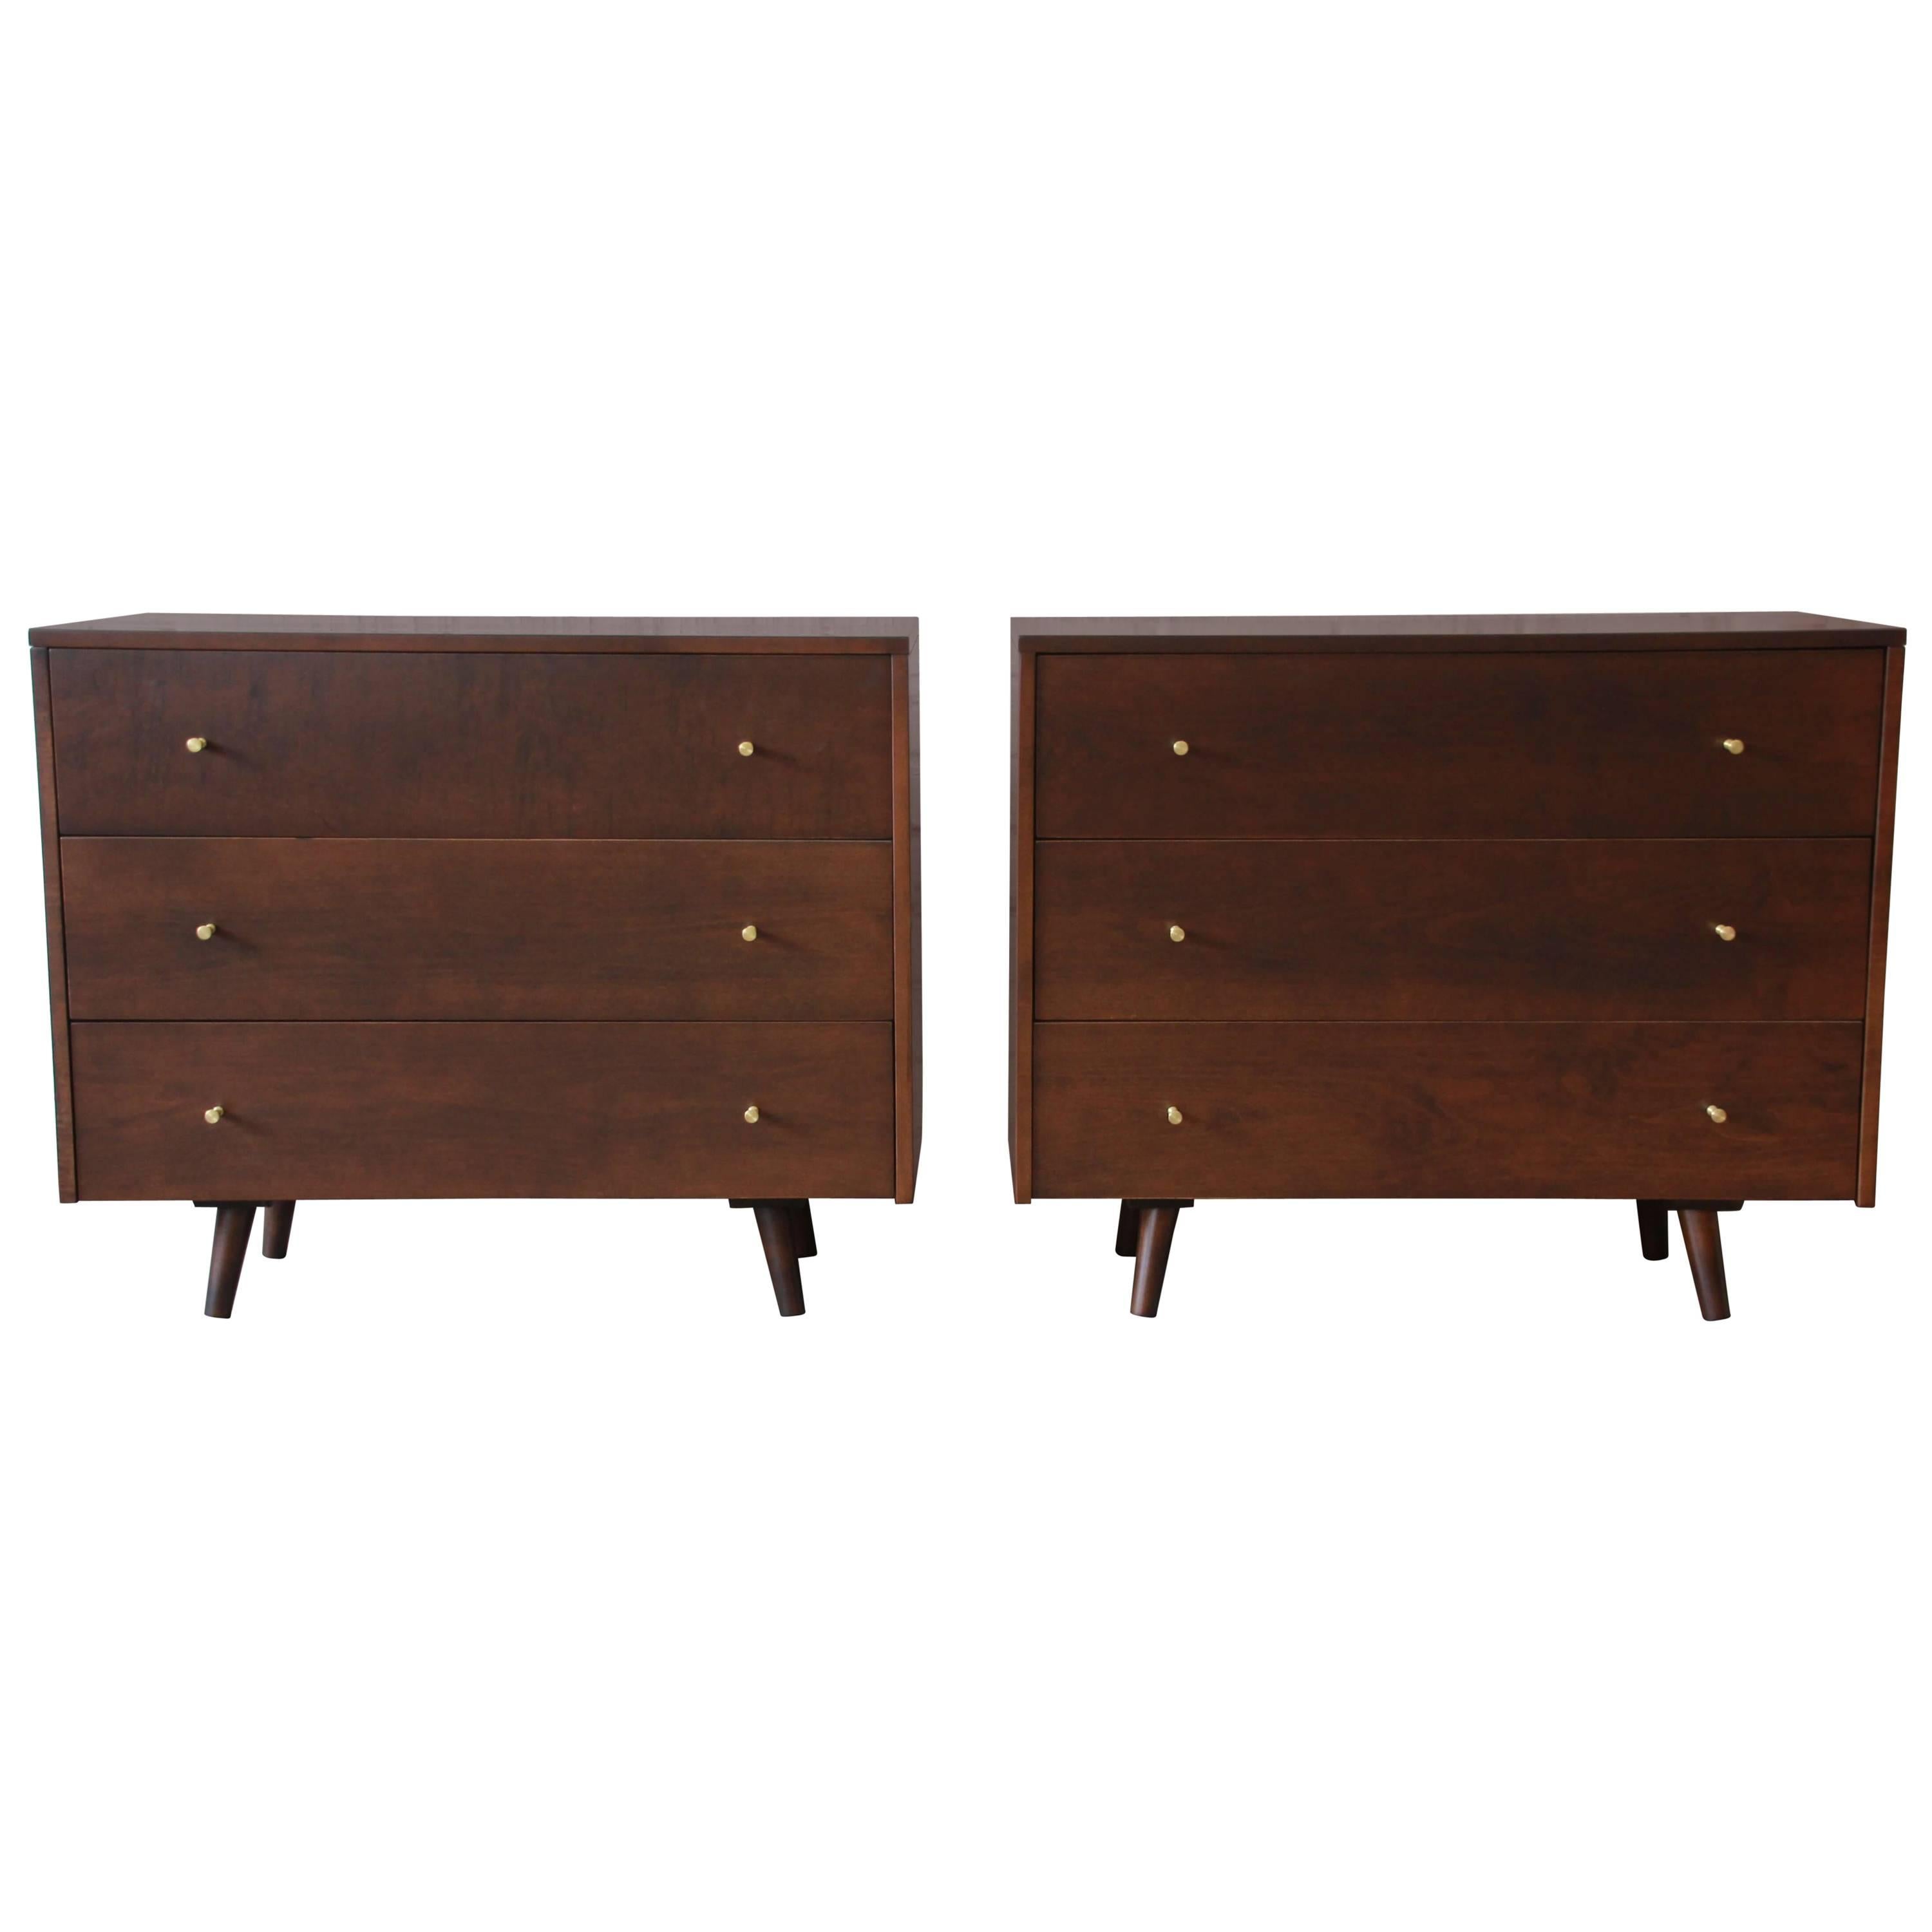 Pair of Paul McCobb Planner Group Three-Drawer Bachelor Chests